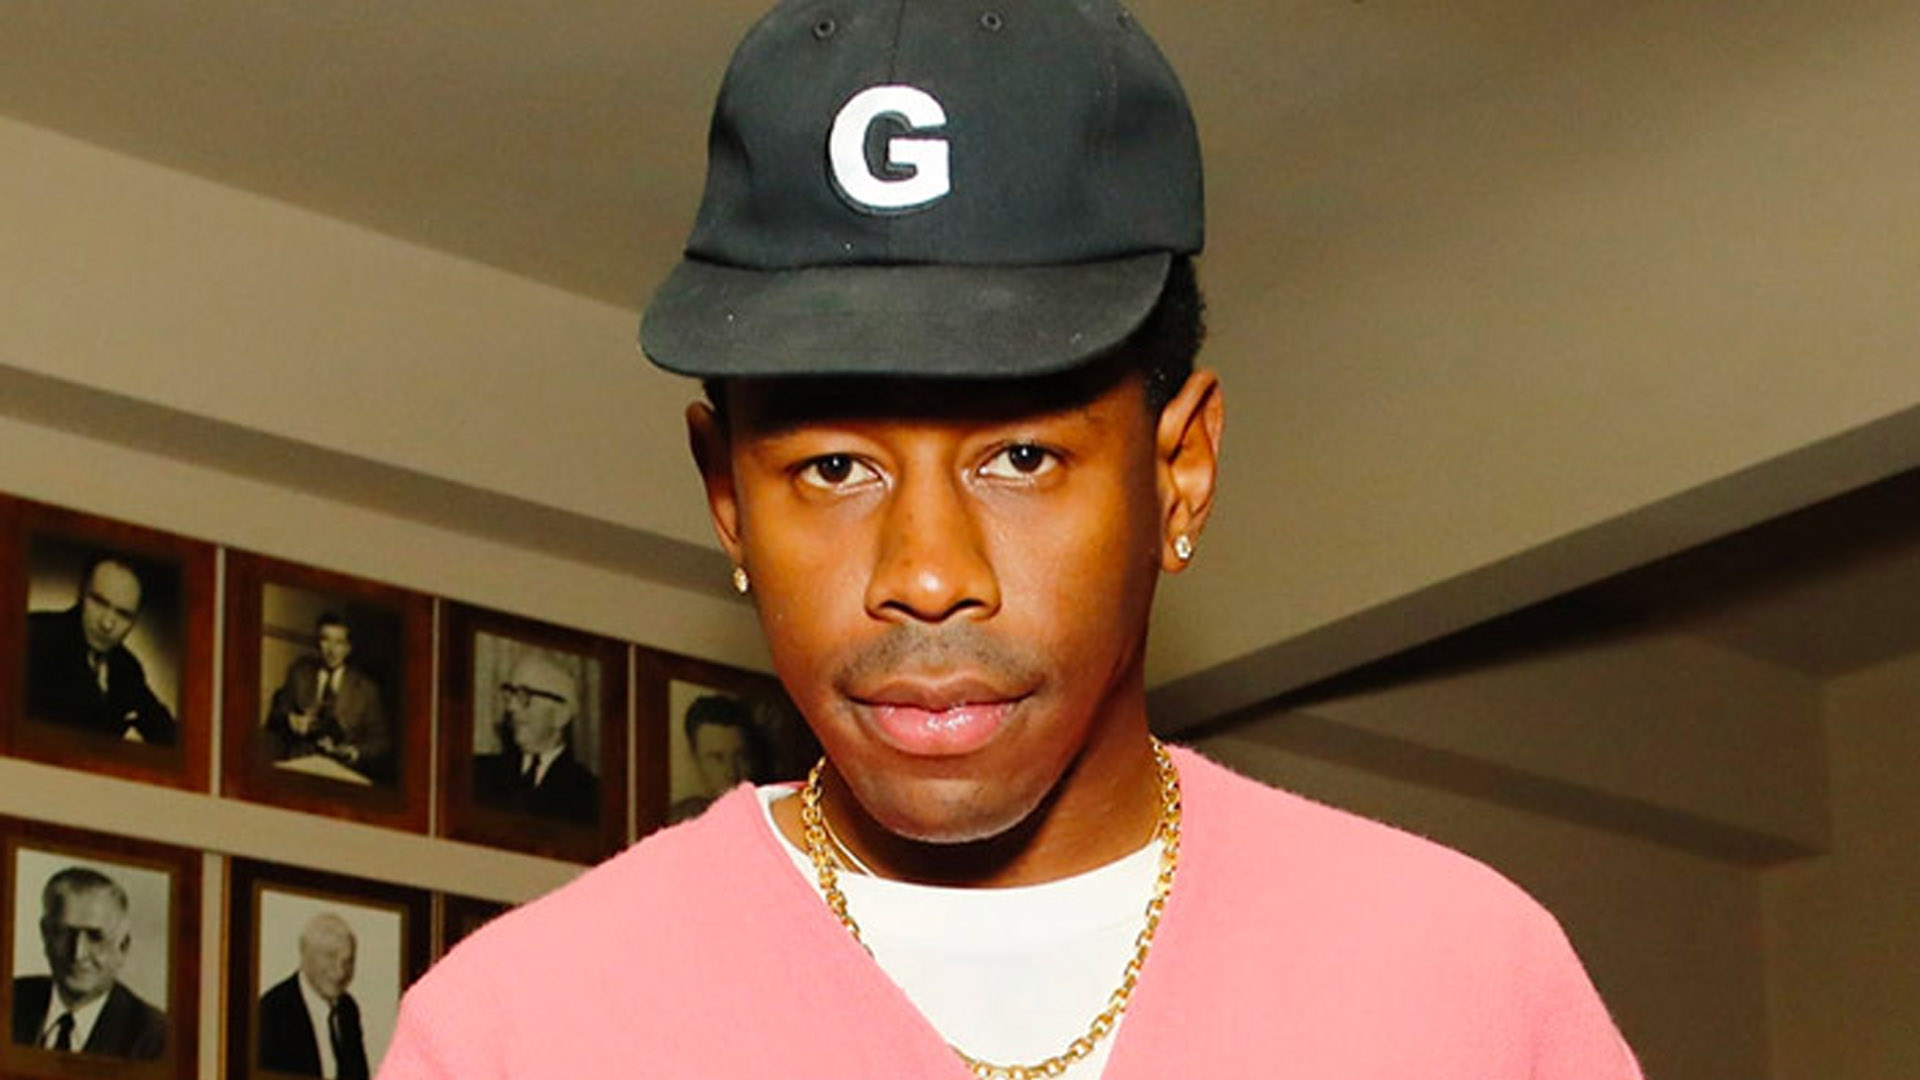 Tyler The Creator Is Wearing Pink White Dress And Gold Chain On Neck And Black Cap 2K Tyler The Creator